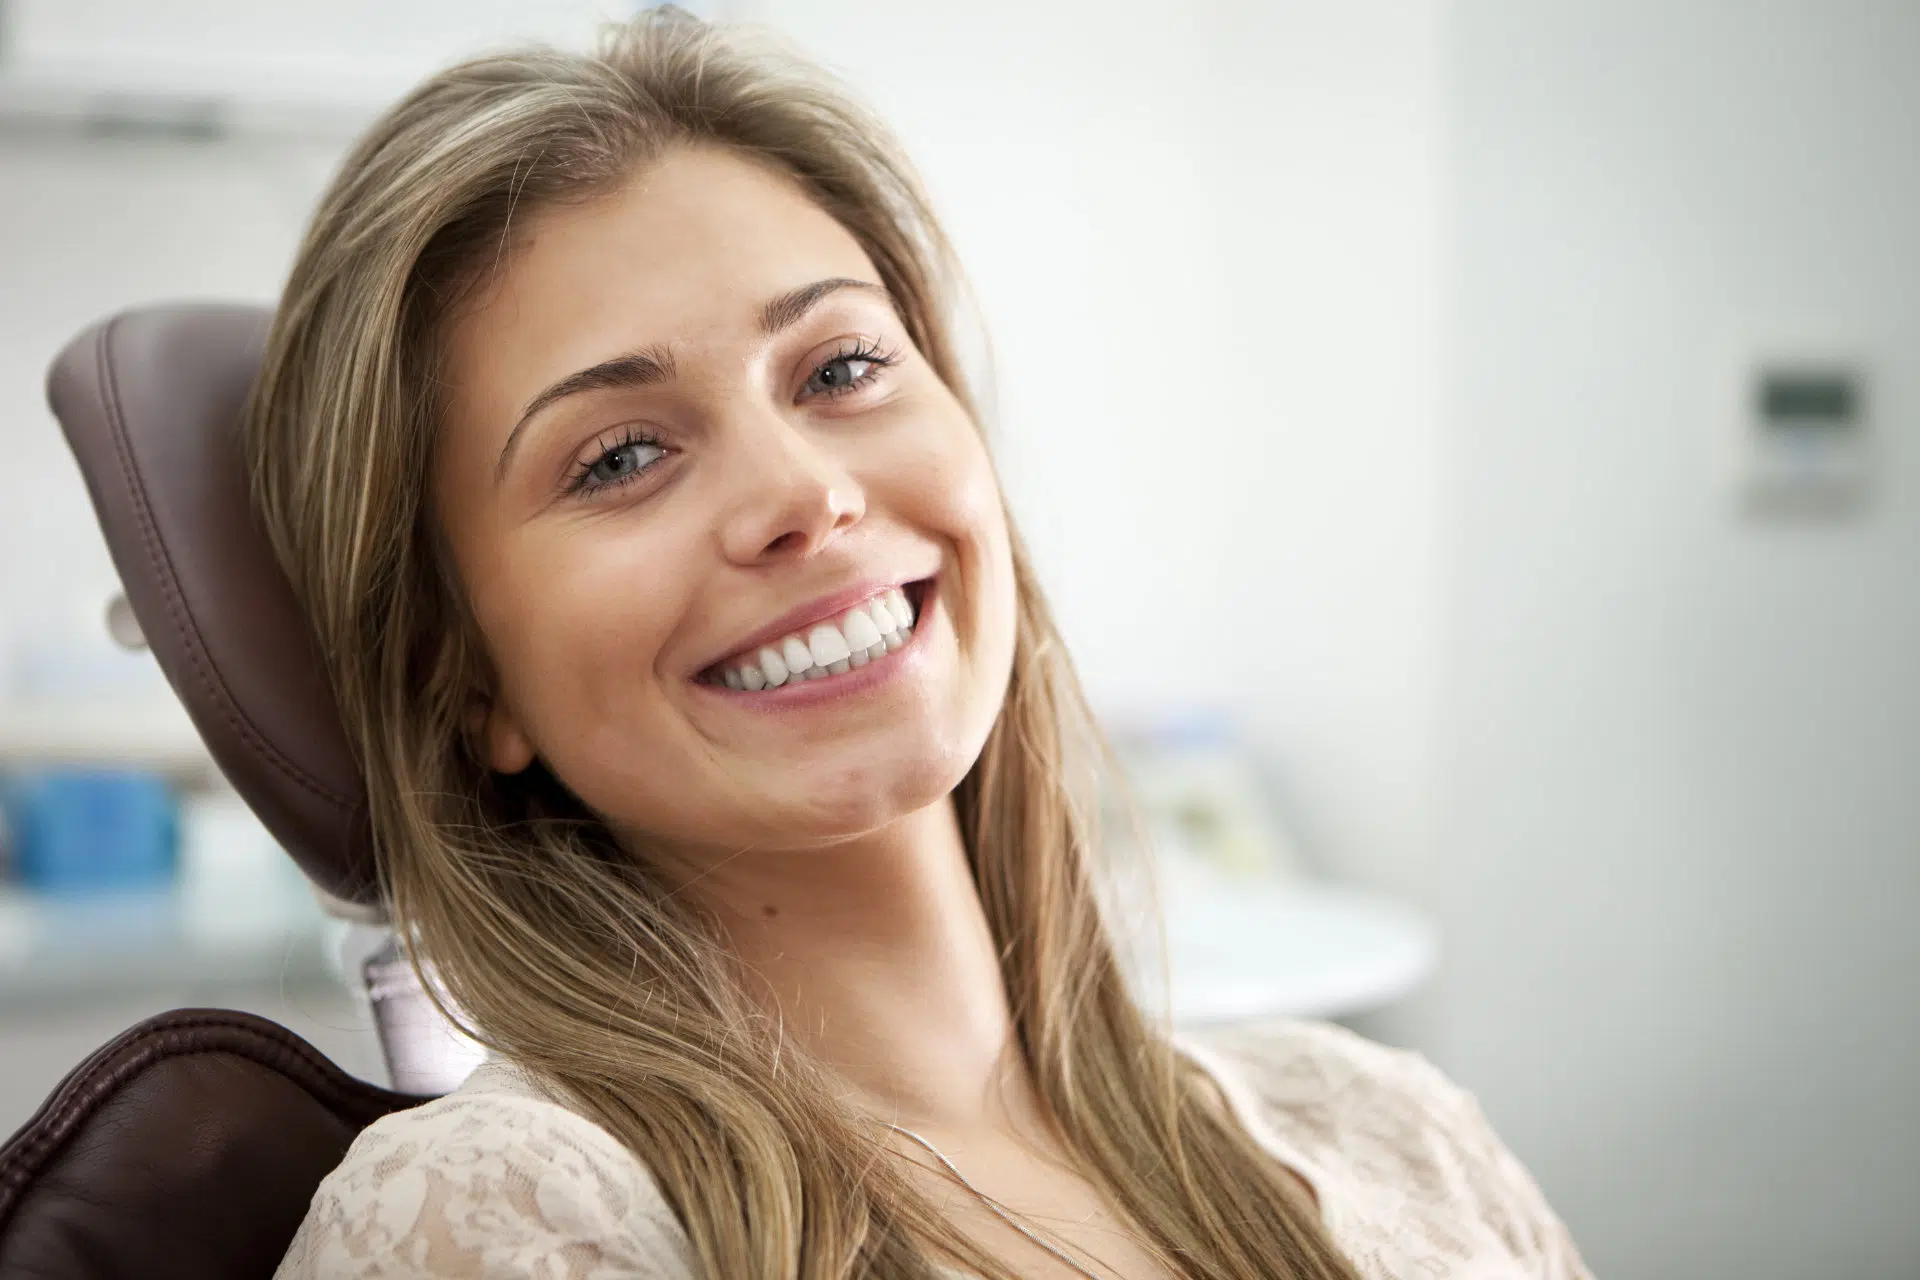 Regain the functionality and aesthetics of your smile with our restorative procedures.